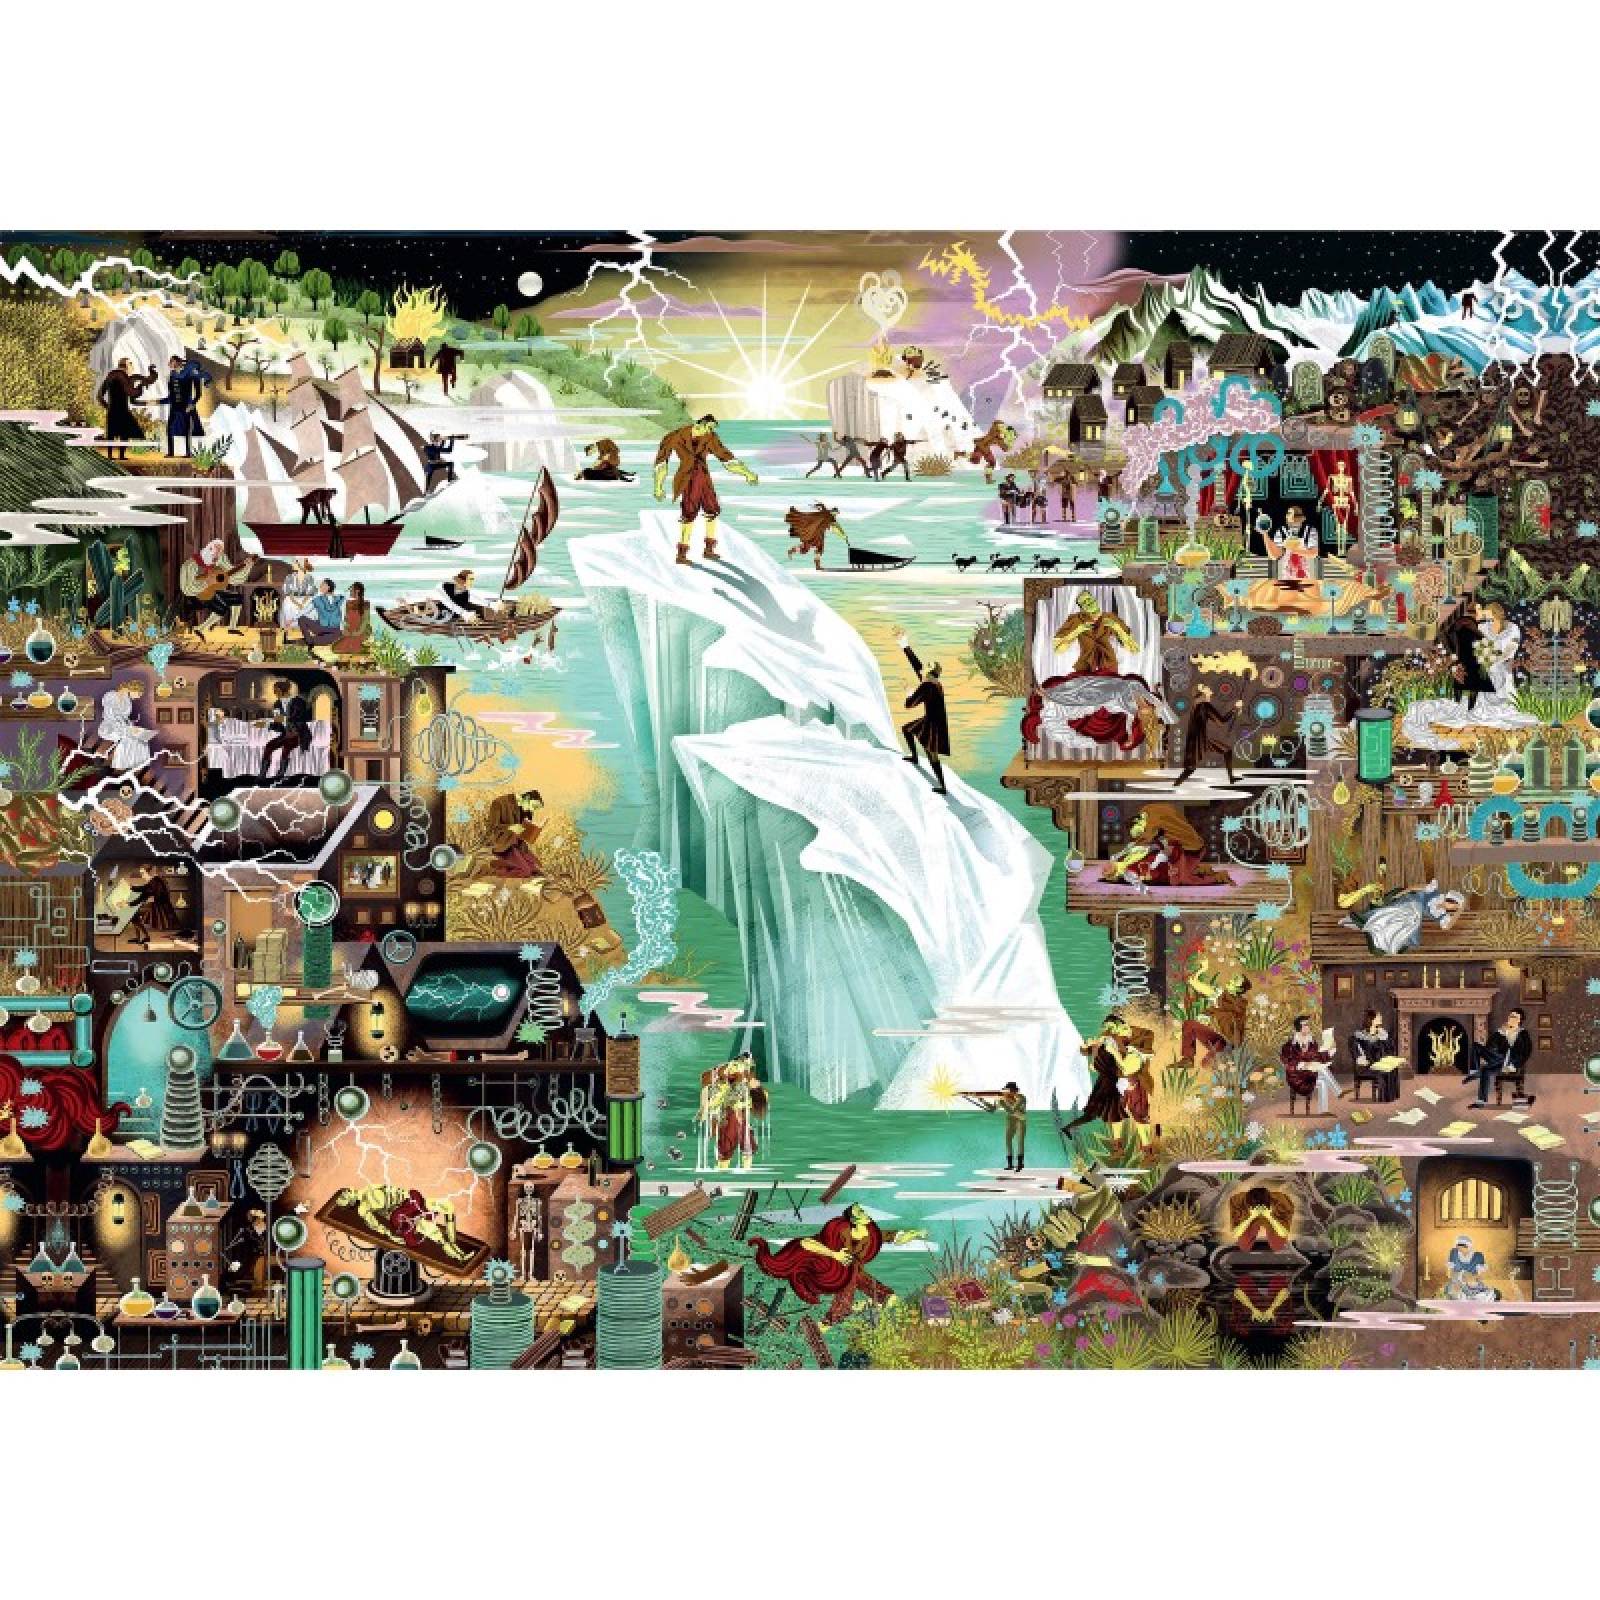 The World Of Frankenstein - 1000 Piece Jigsaw Puzzle thumbnails